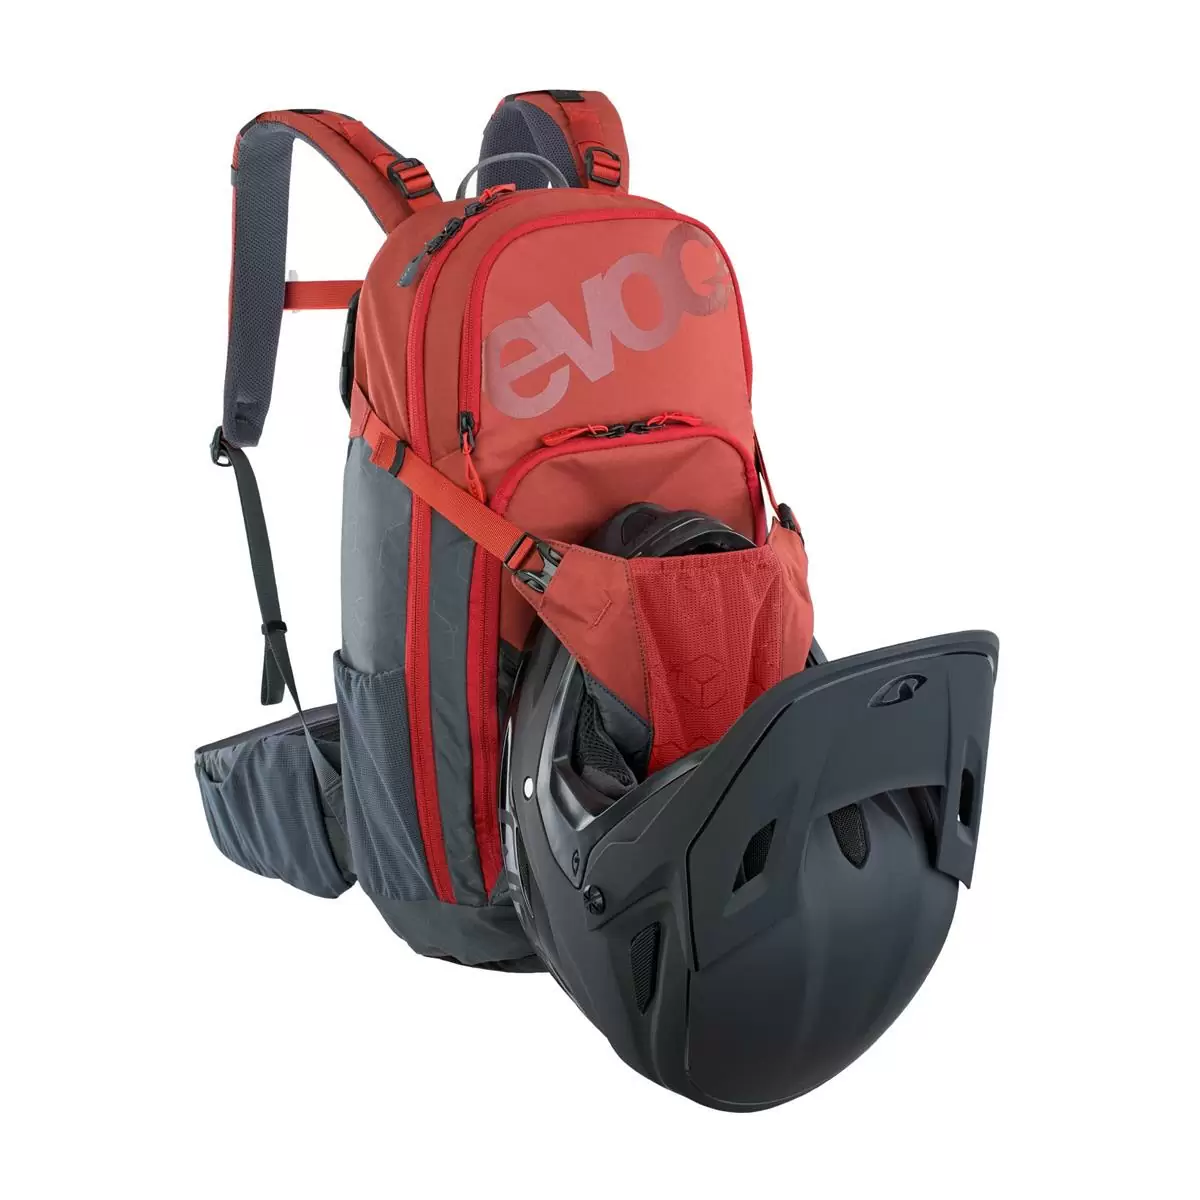 Backpack Neo 16L Grey/Red S/M #5